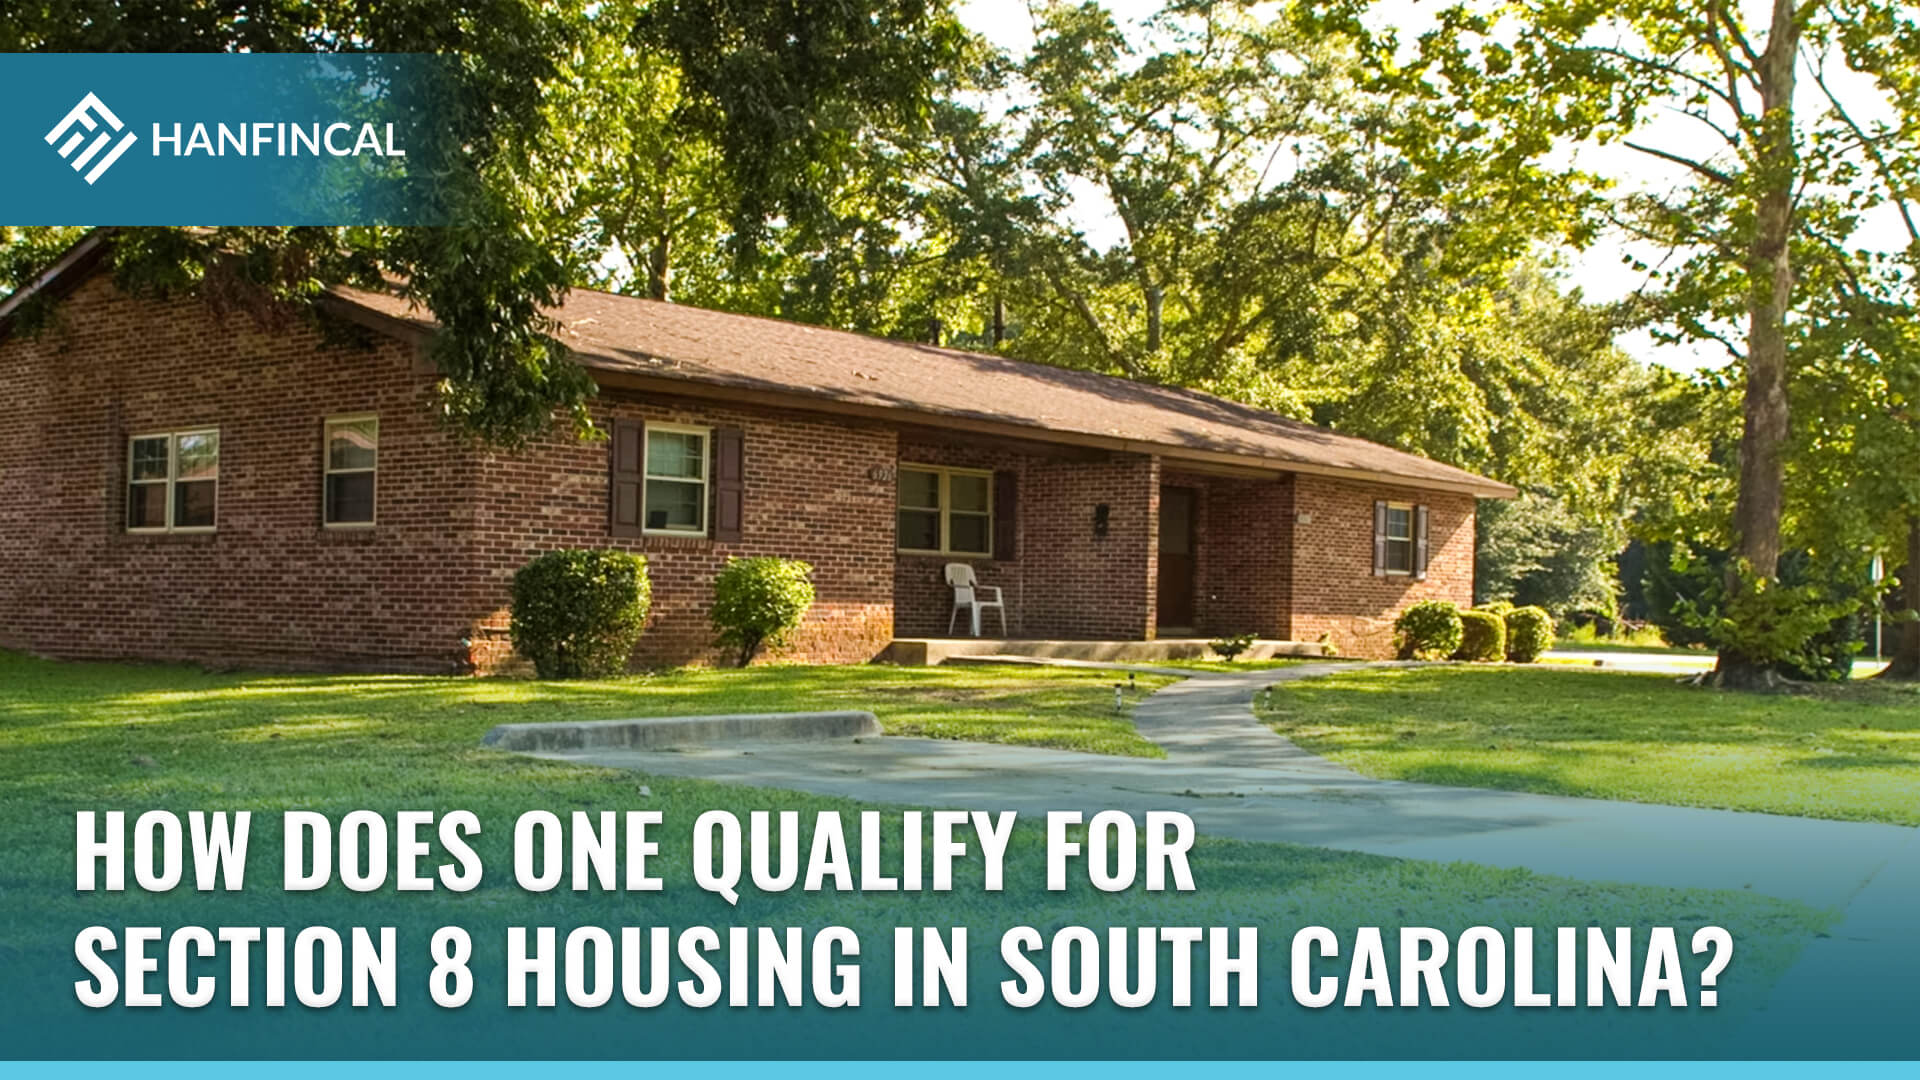 How does one qualify for Section 8 Housing in South Carolina?